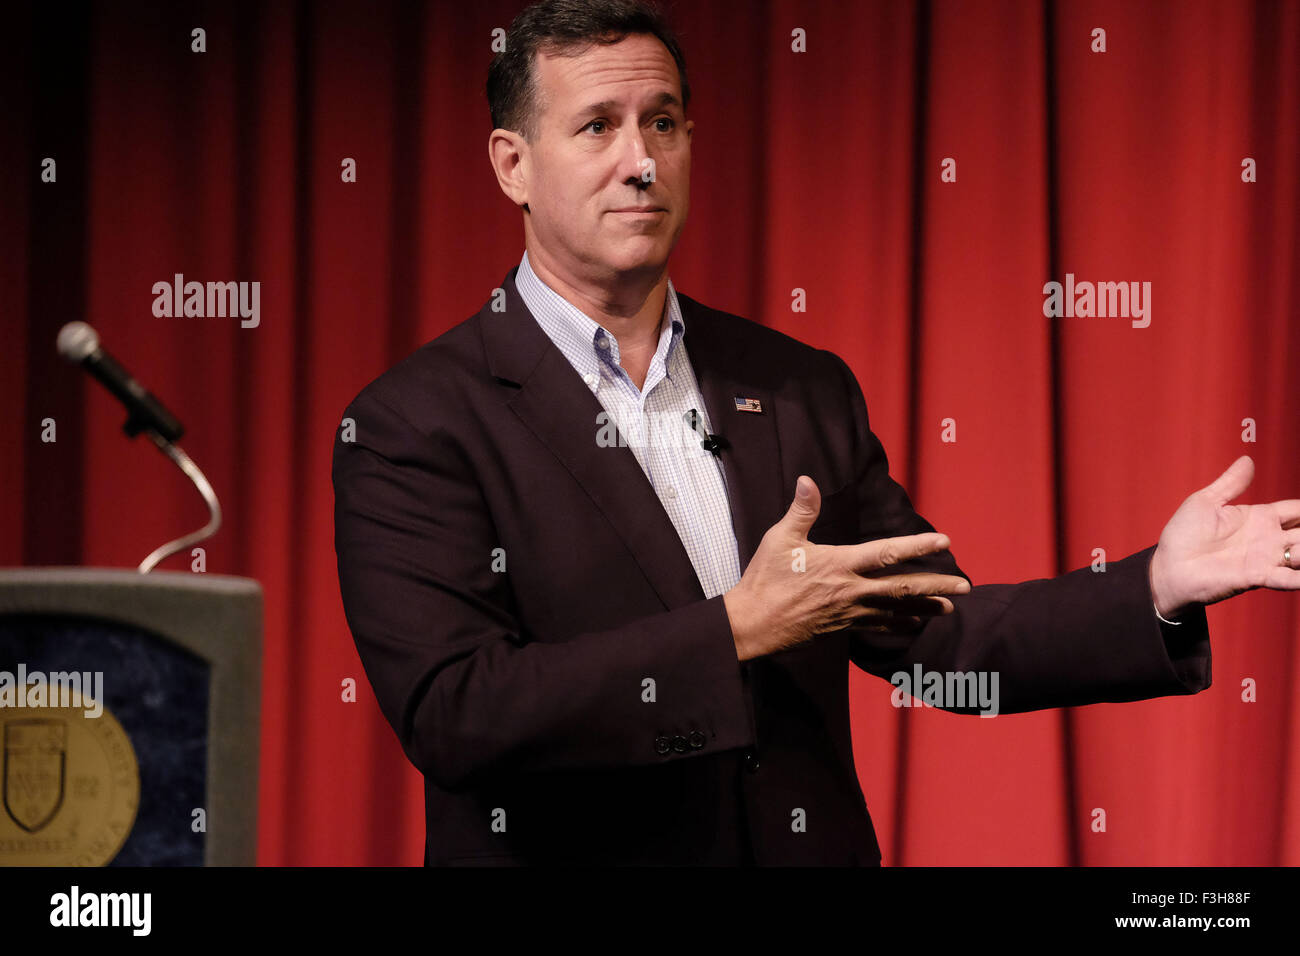 Sioux City, IOWA, USA. 7th Oct, 2015. Republican presidential candidate and former U.S. Sen. RICK SANTORUM (R-PA) speaks at a town hall meeting Wednesday, Oct. 7, 2015, at Briar Cliff University, a Catholic university. He explained to a student that laws concerning illegal immigration should benefit America and its citizens as a whole and not just those who are breaking the law. © Jerry Mennenga/ZUMA Wire/Alamy Live News Stock Photo